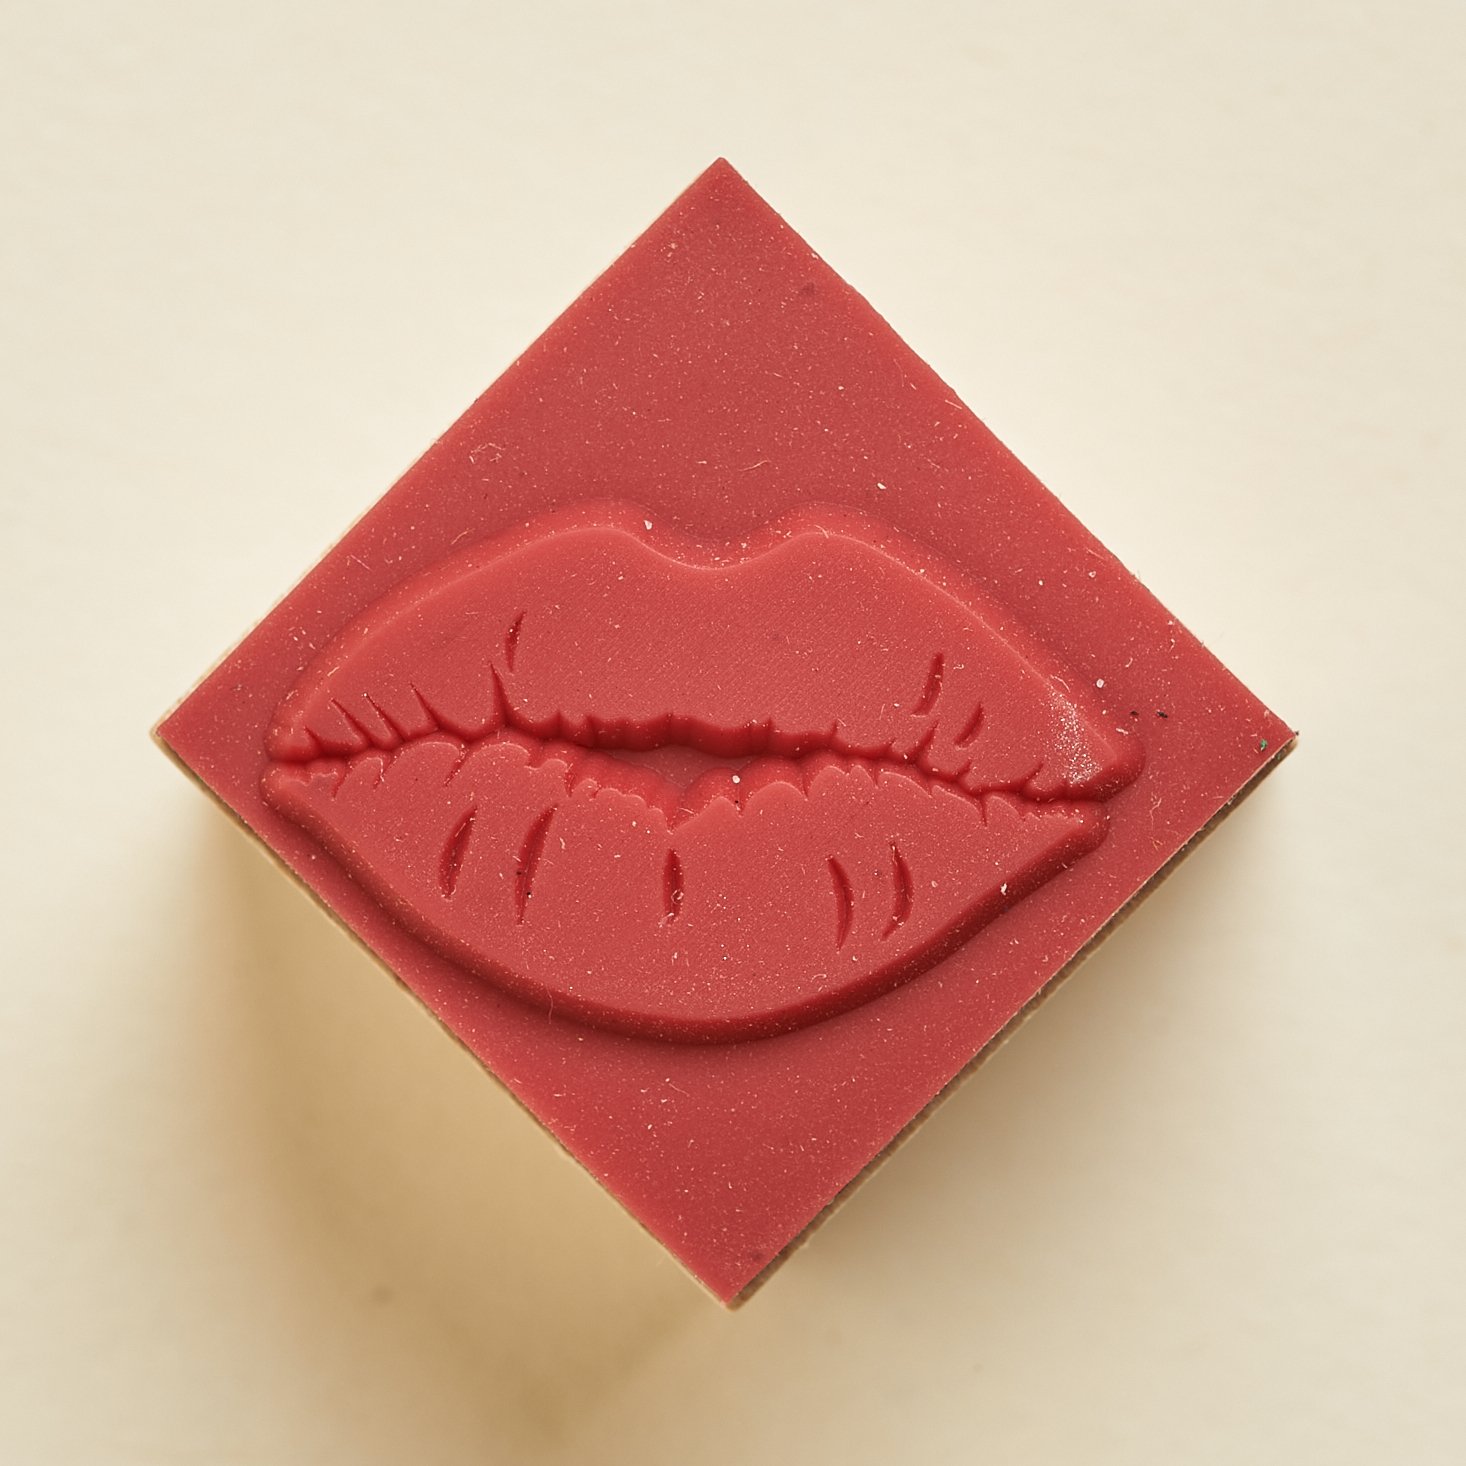 Kiss rubber stamp from Postmarkd Studio February 2021